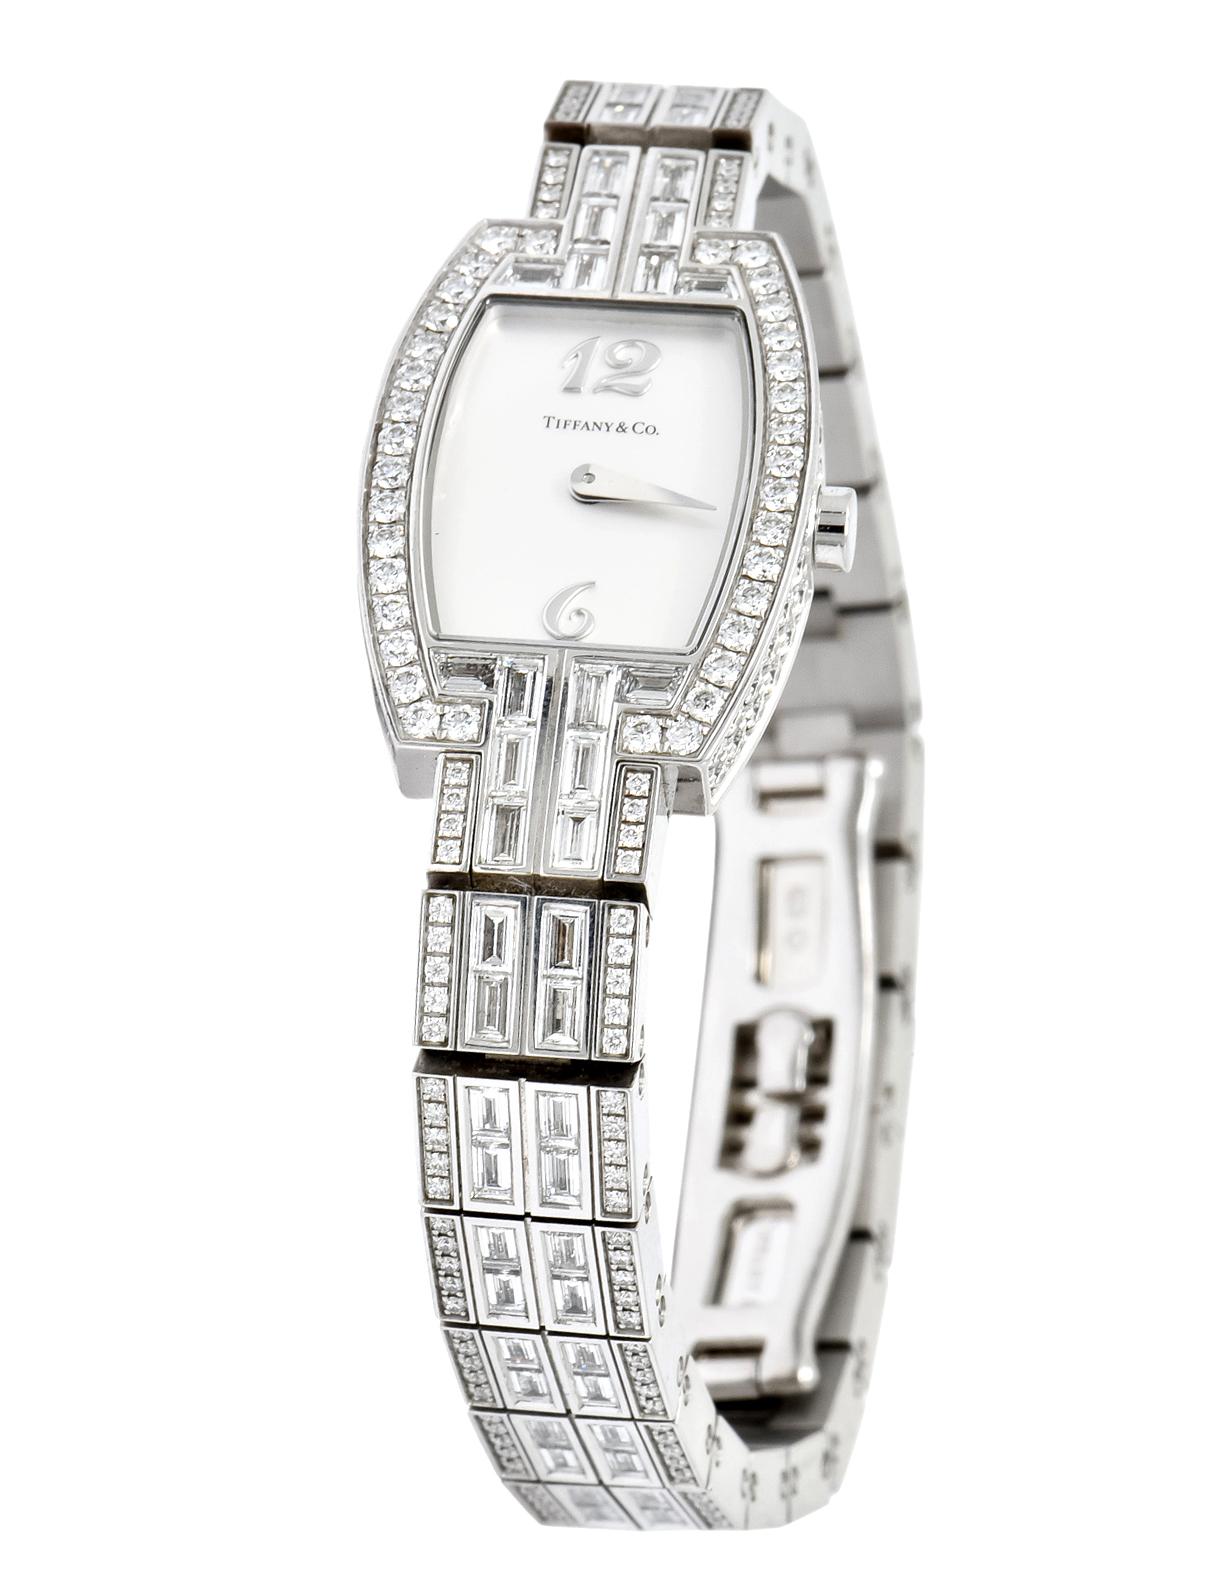 Tiffany & Co. Tonneau wristwatch set with 430 round brilliant and baguette diamonds weighing approximately 8.20 carats total

Diamonds are IF-SI1 clarity and G-H in color

Quartz Movement with Arabic numerals 

Mounted in 18 karat white gold

From